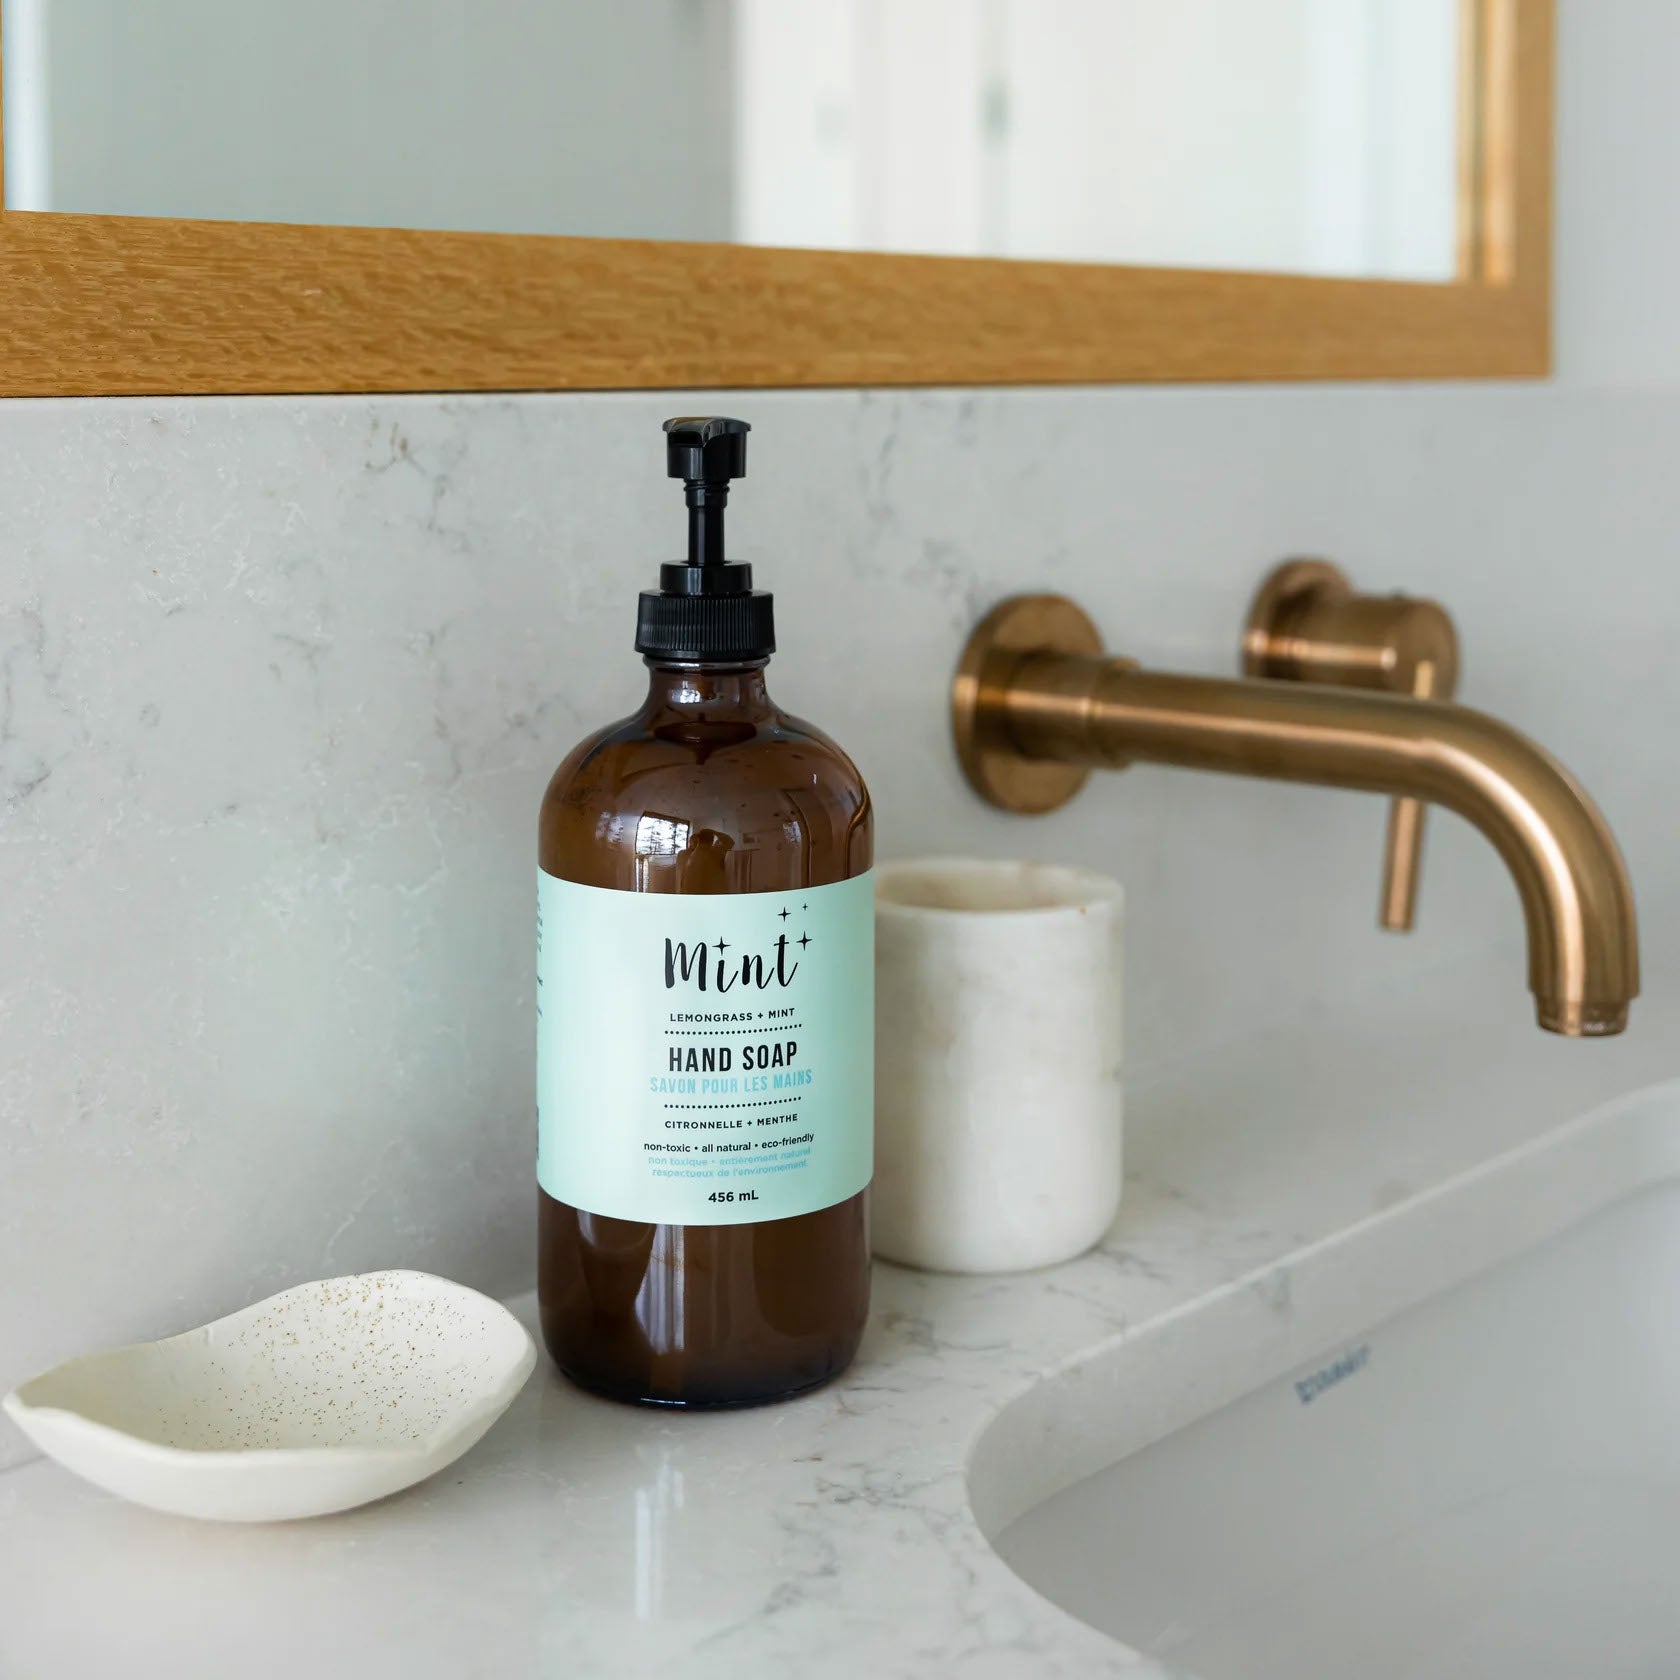 A gentle formula made with jojoba oil and plant-based, all natural cleansing agents that leaves your hands feeling soft and clean.